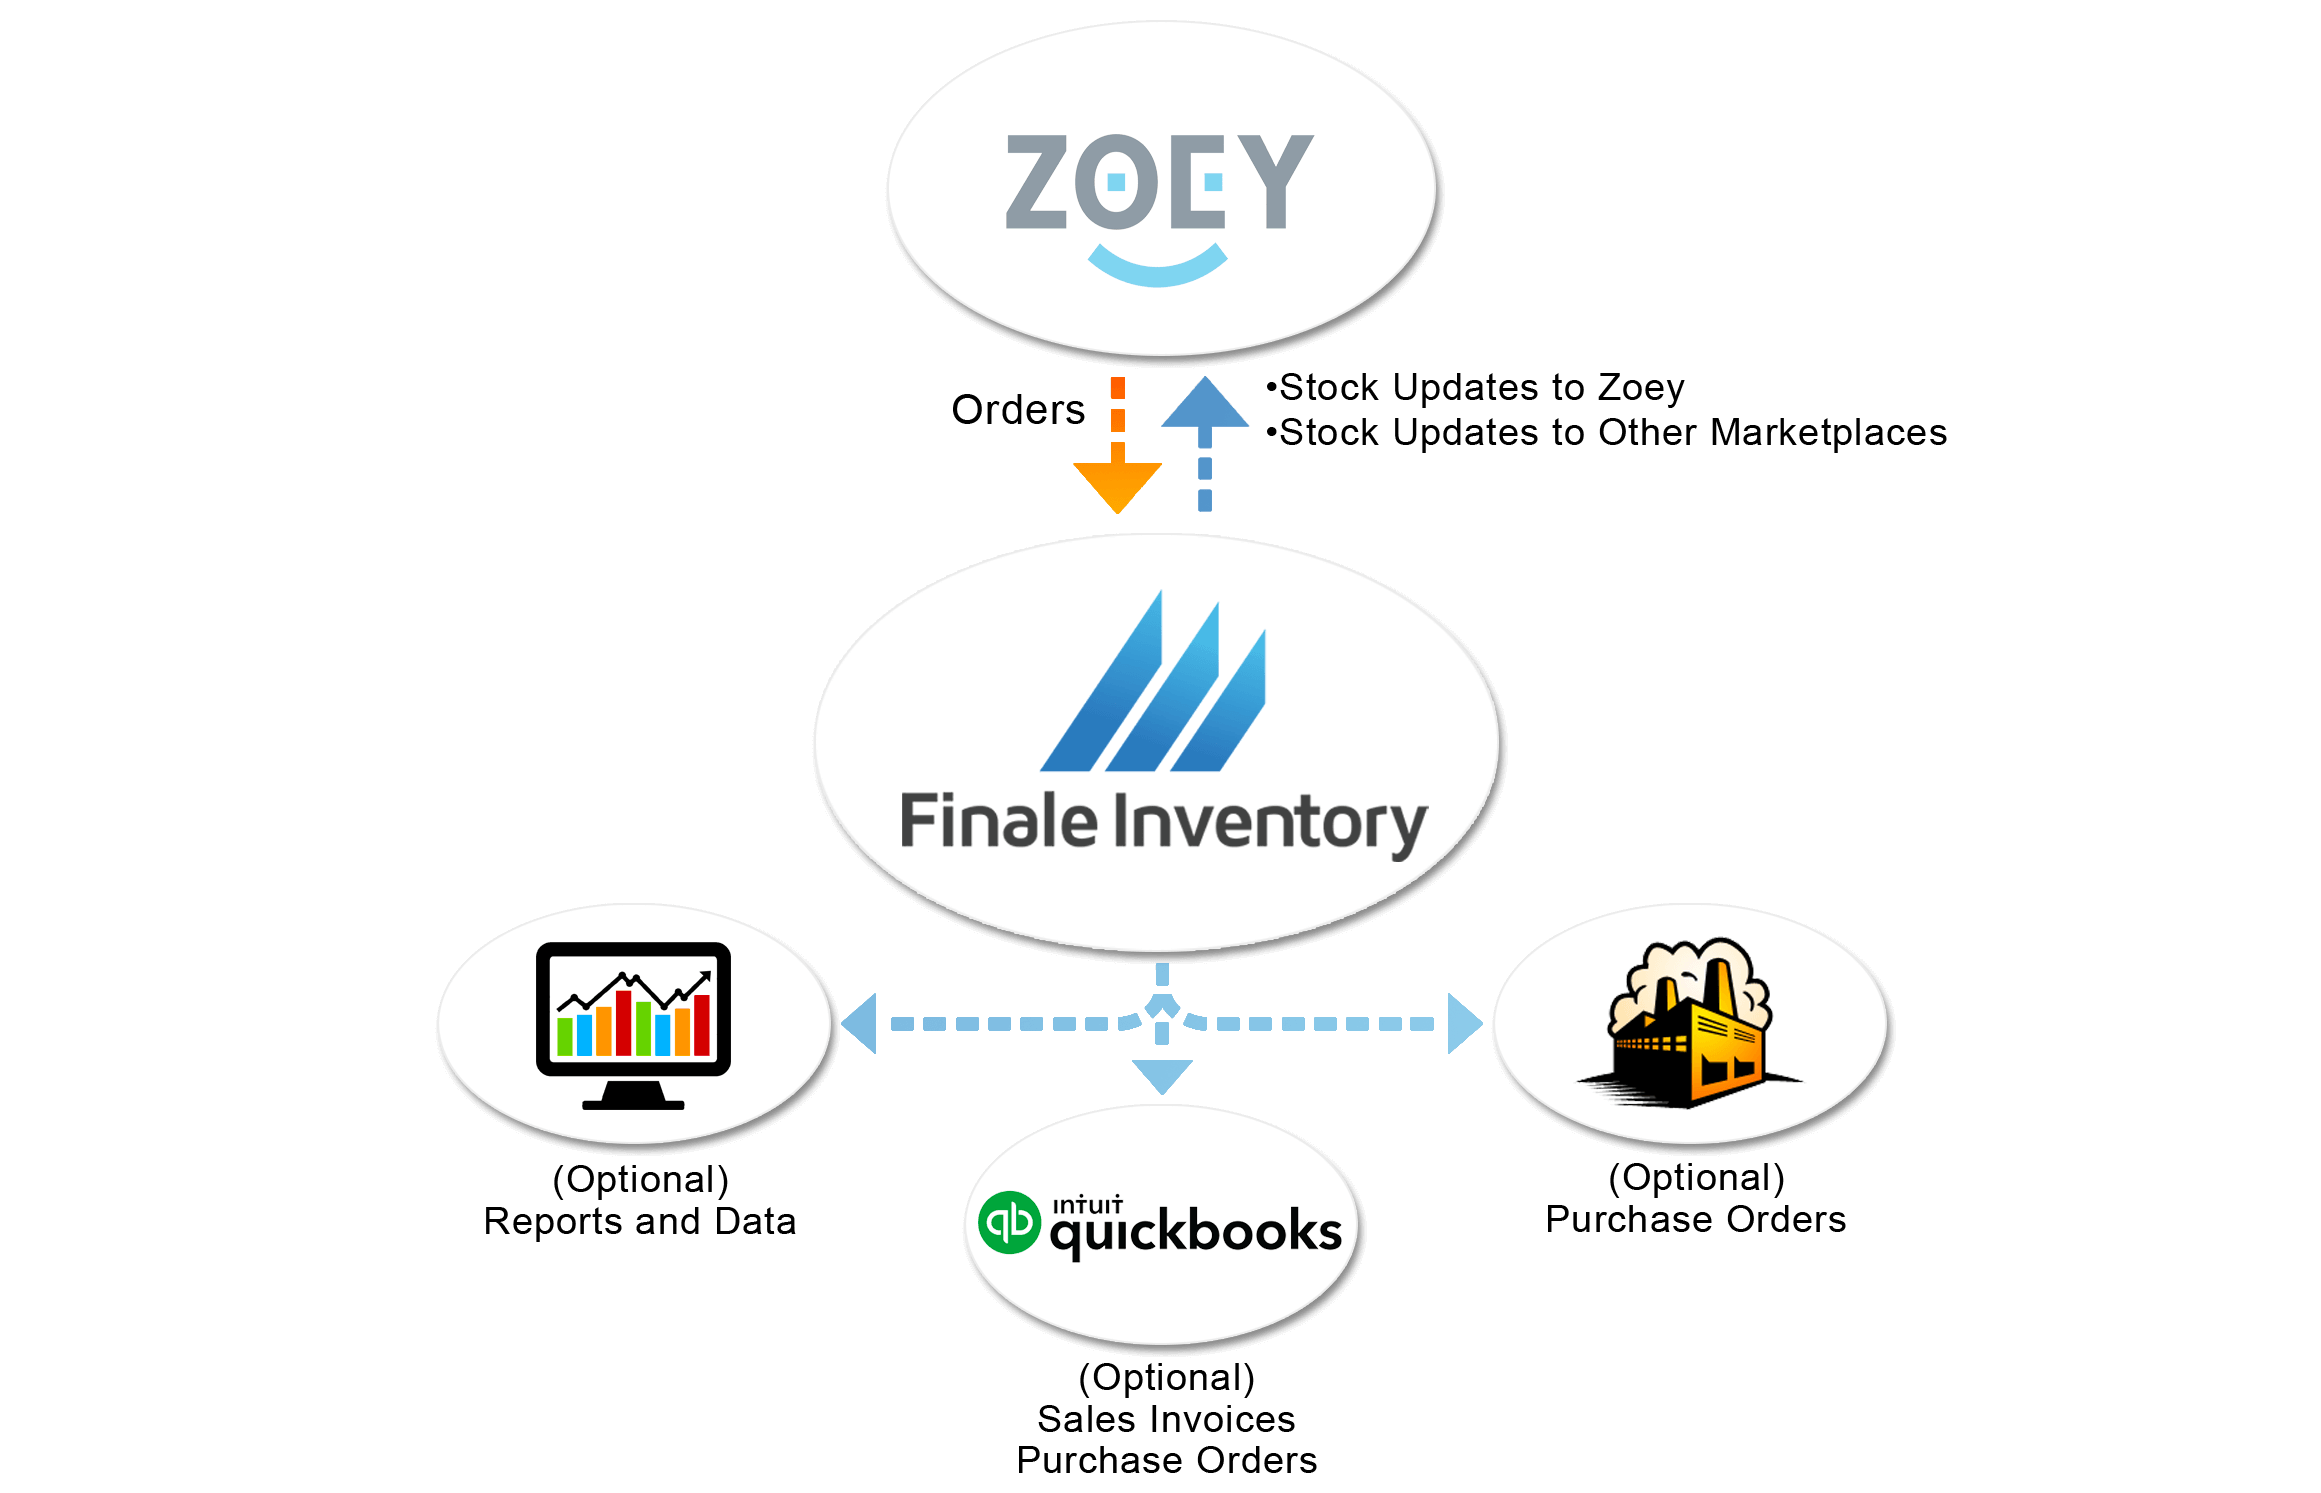 Zoey direct integration flow chart